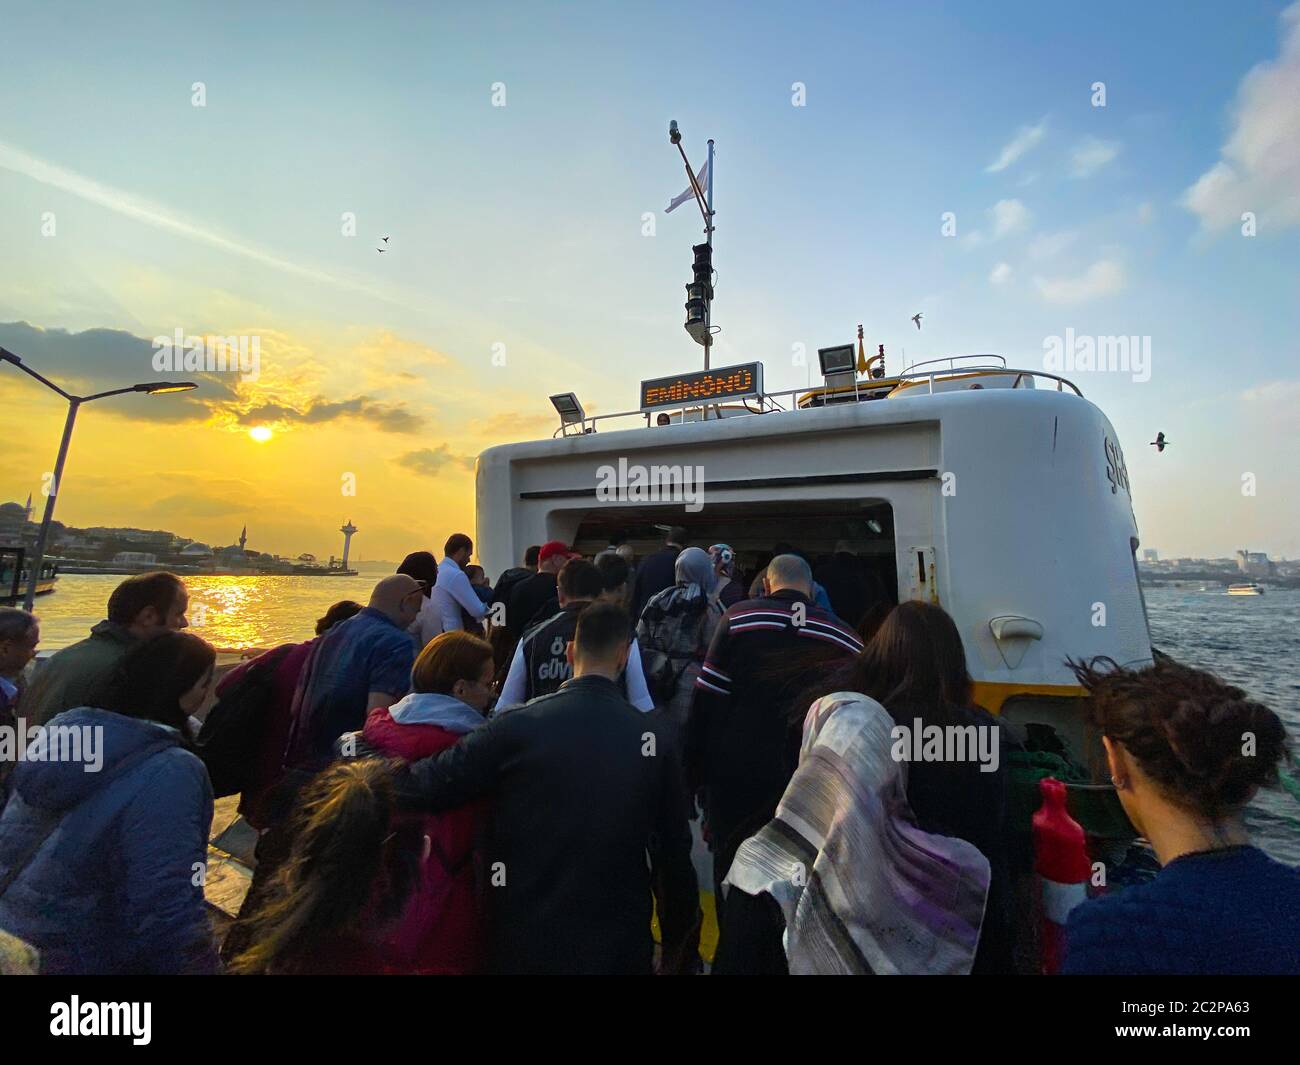 October 30, 2019. Passengers on ferry ride left. People traveling by ship. passengers go from pier to ferry. People boarding shi Stock Photo